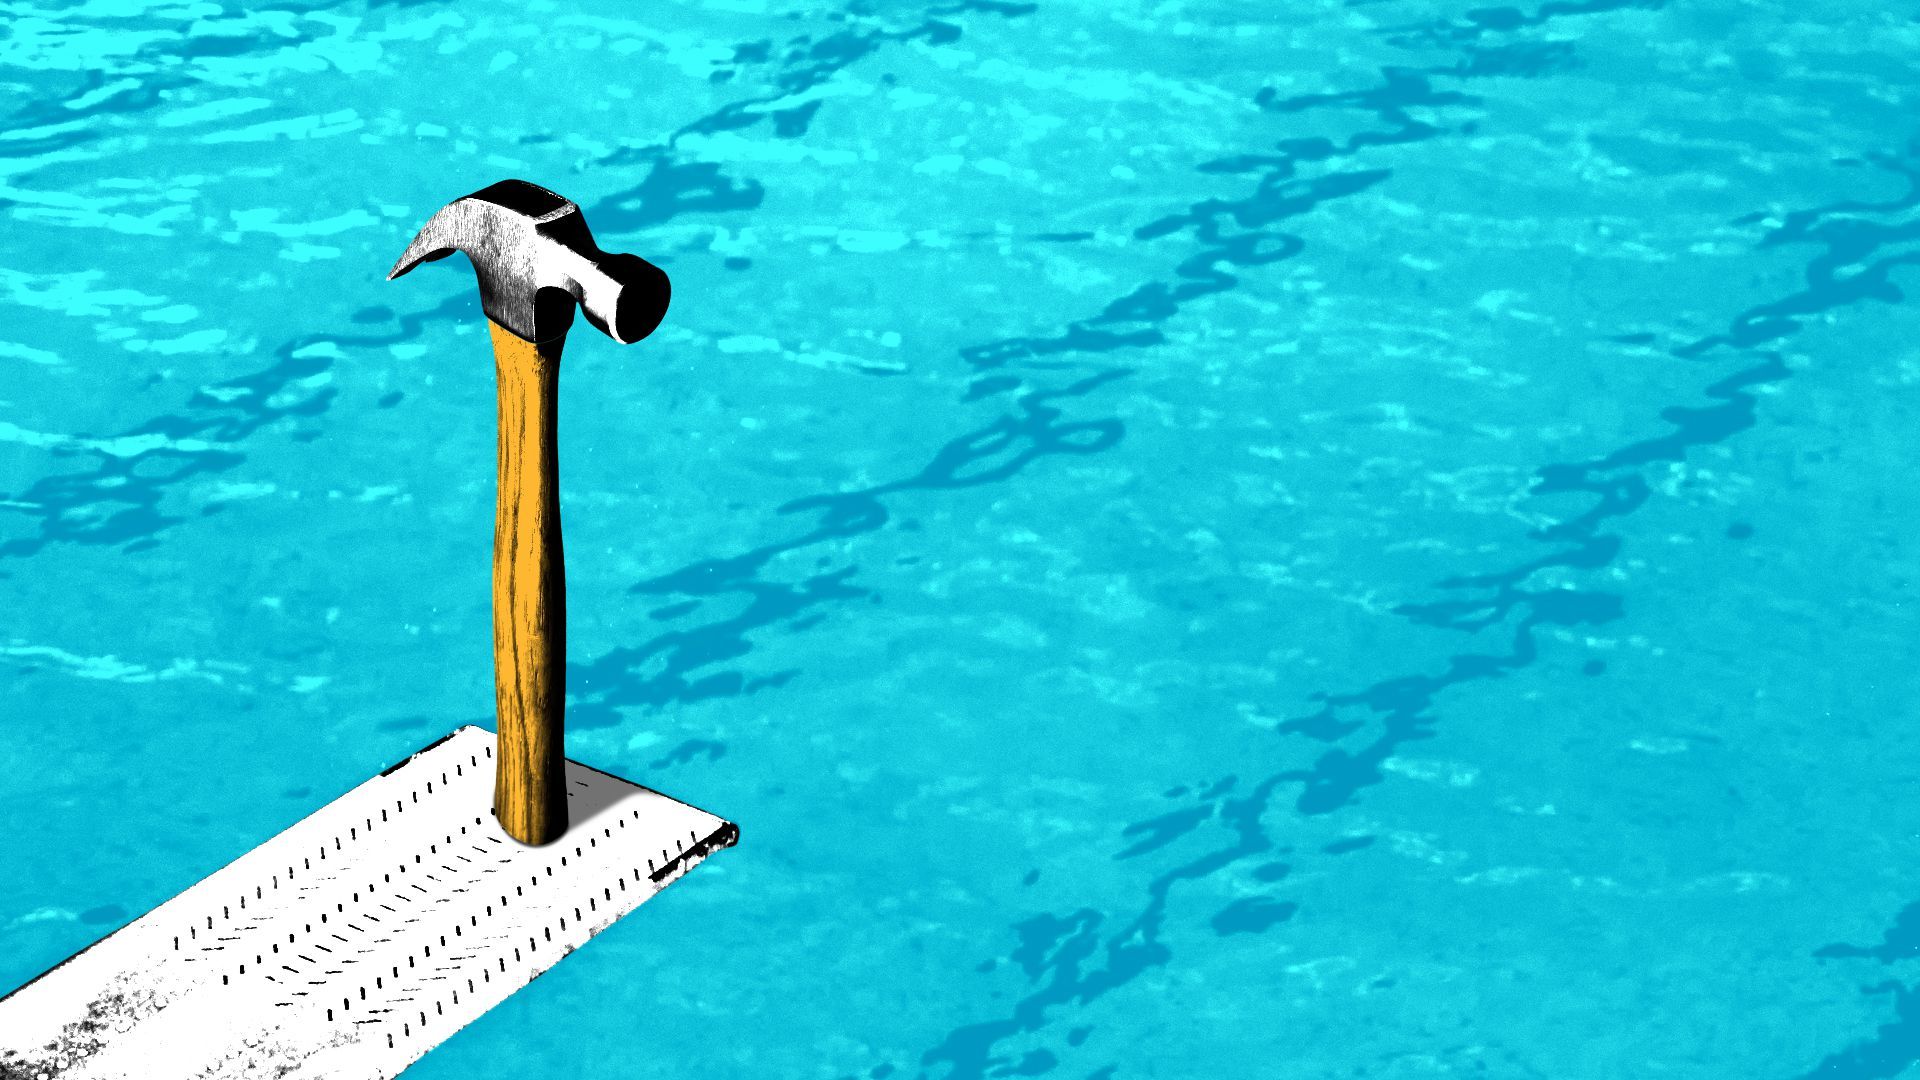 Illustration of a hammer on a diving board over a pool.